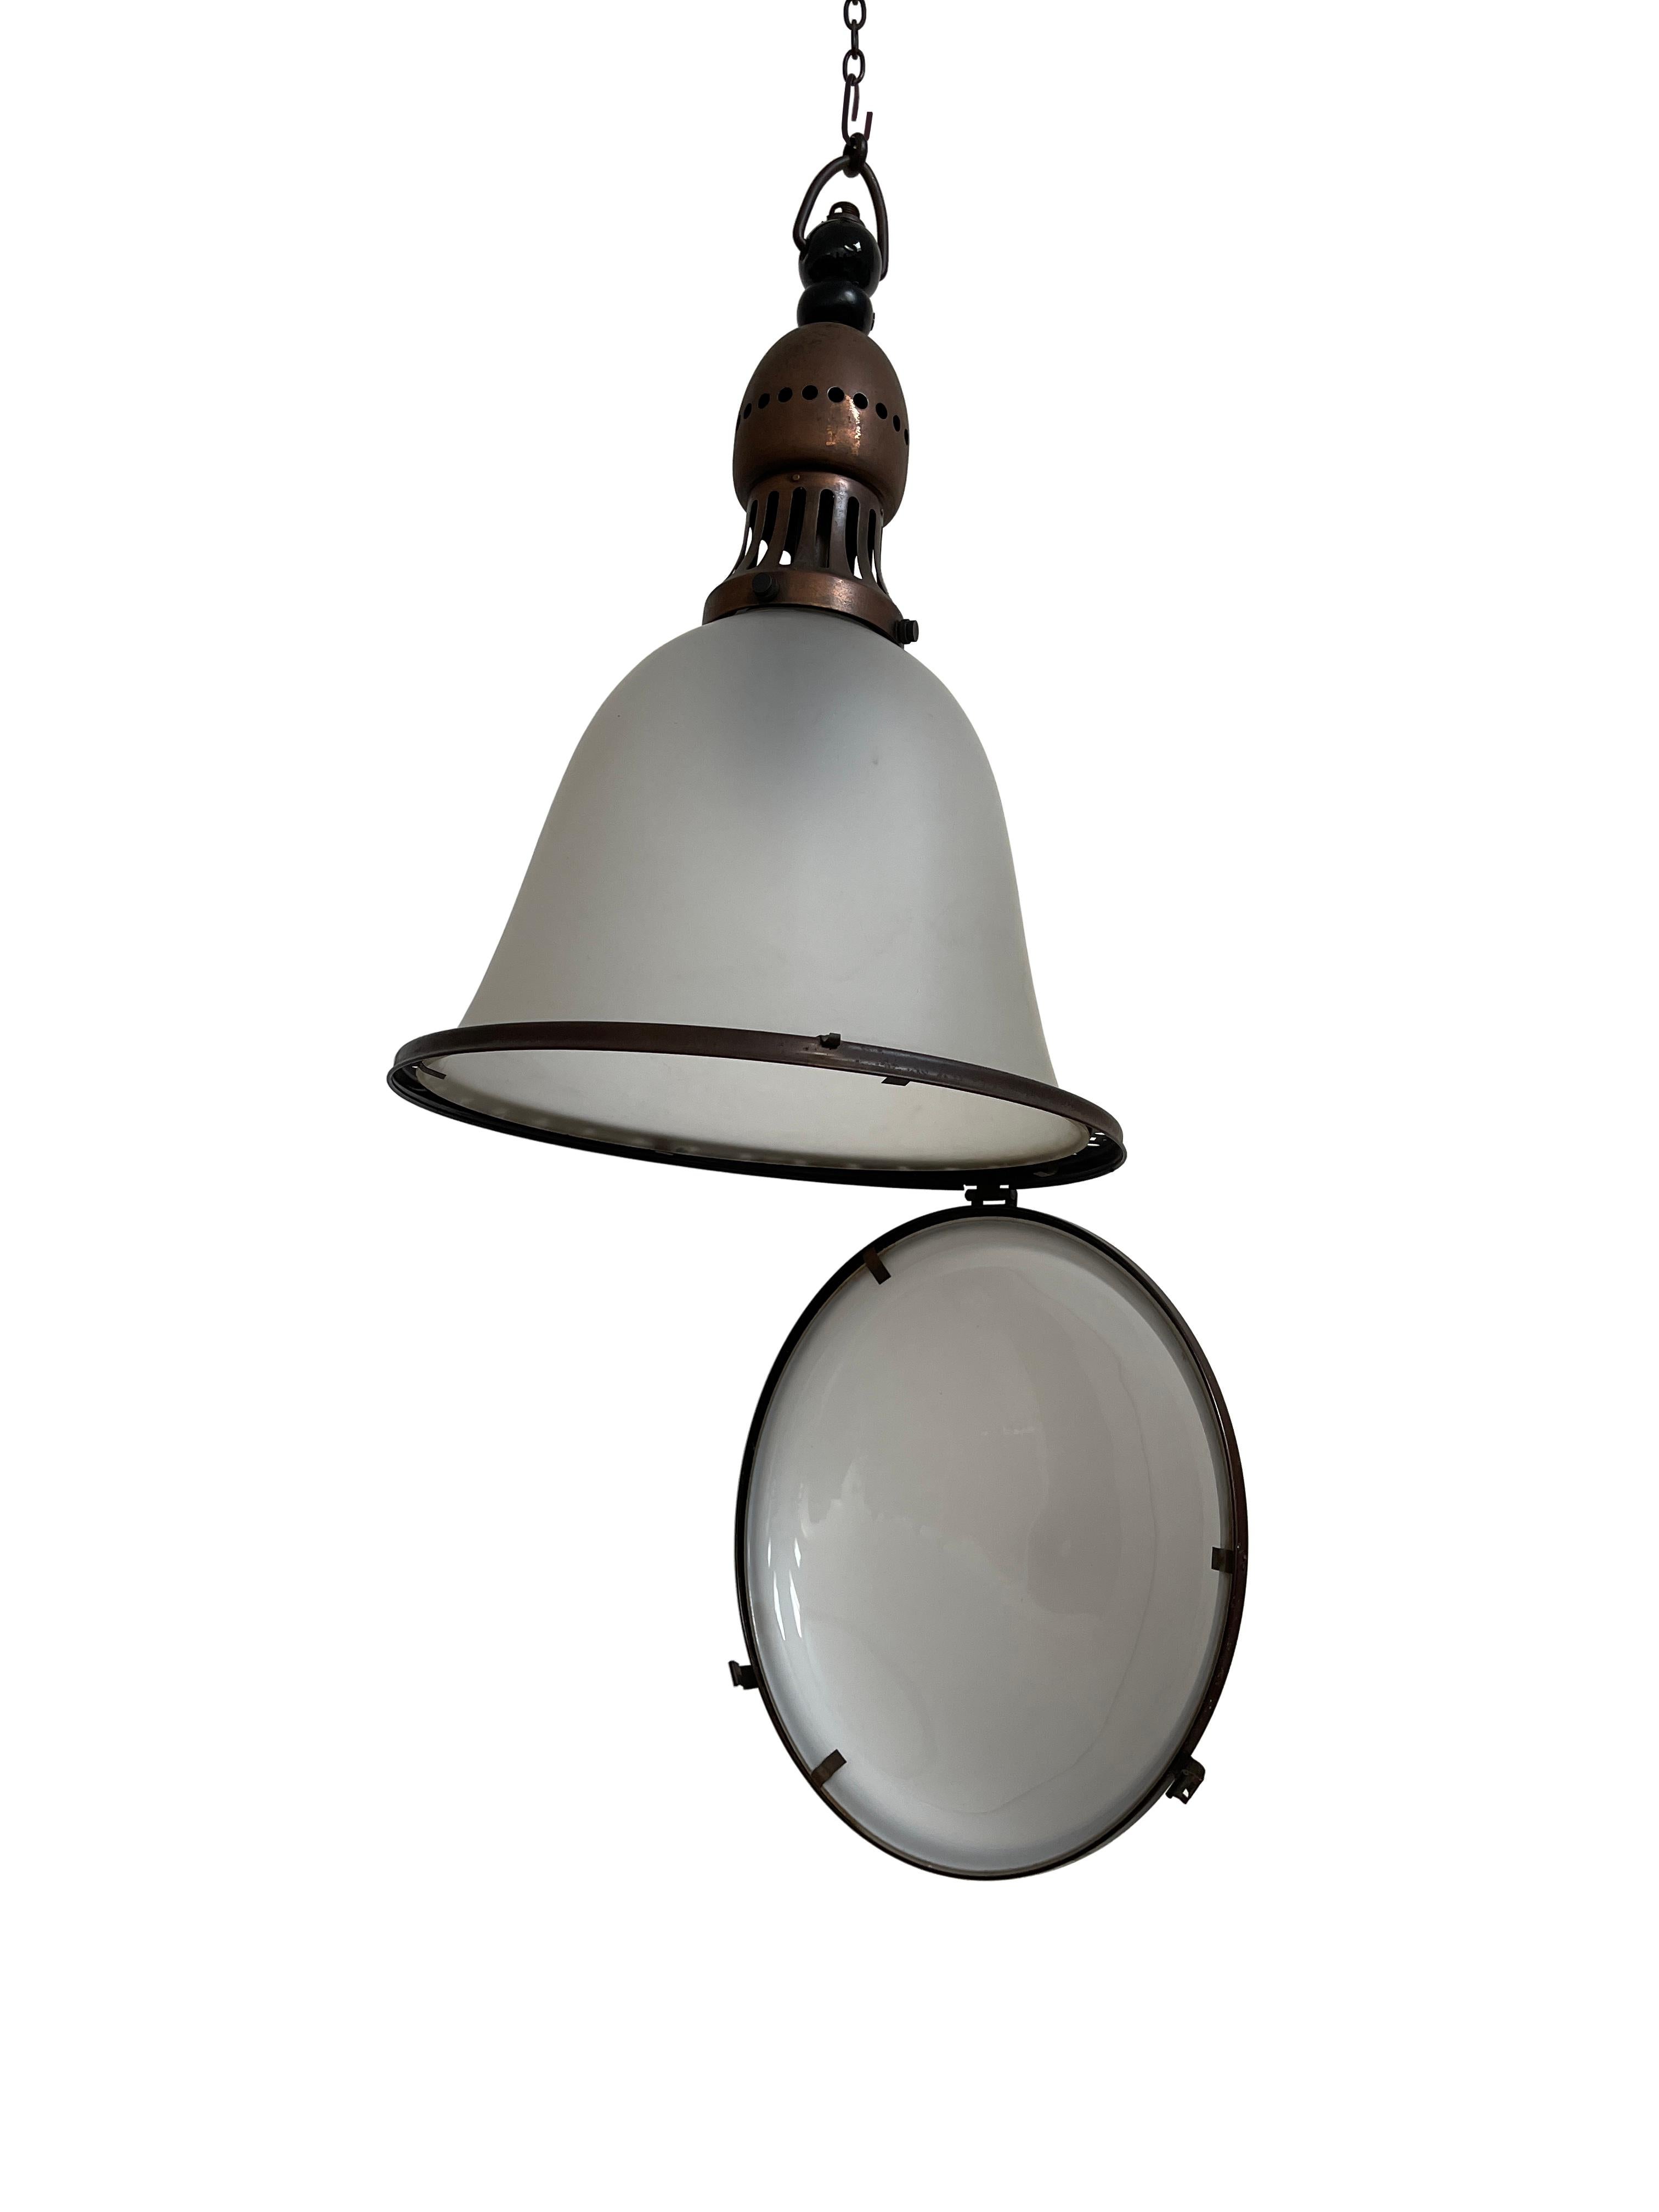 Antique Vintage Bauhaus Kandem Opaline Etched Glass Ceiling Pendant Light Lamp In Good Condition For Sale In Sale, GB